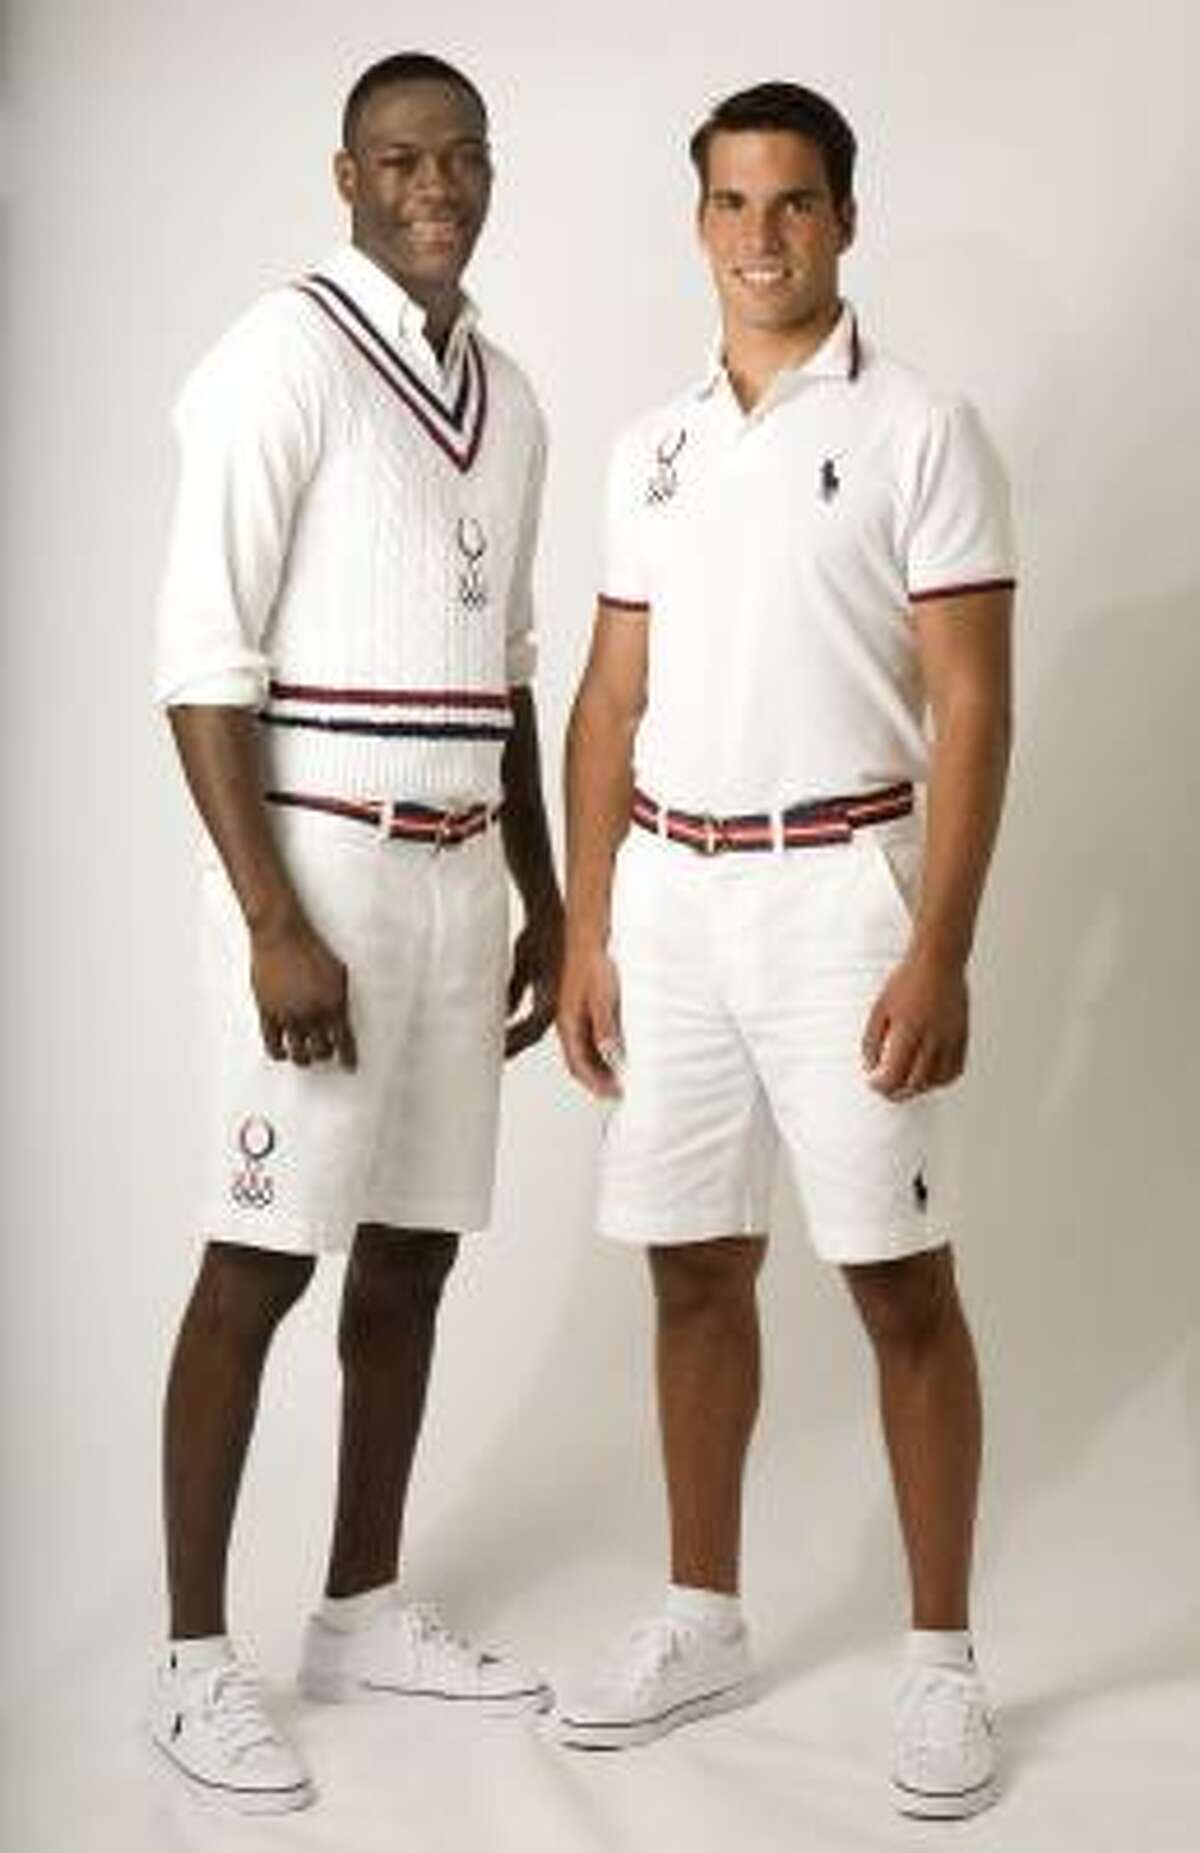 Polo Ralph Lauren to outfit . Olympians in Beijing